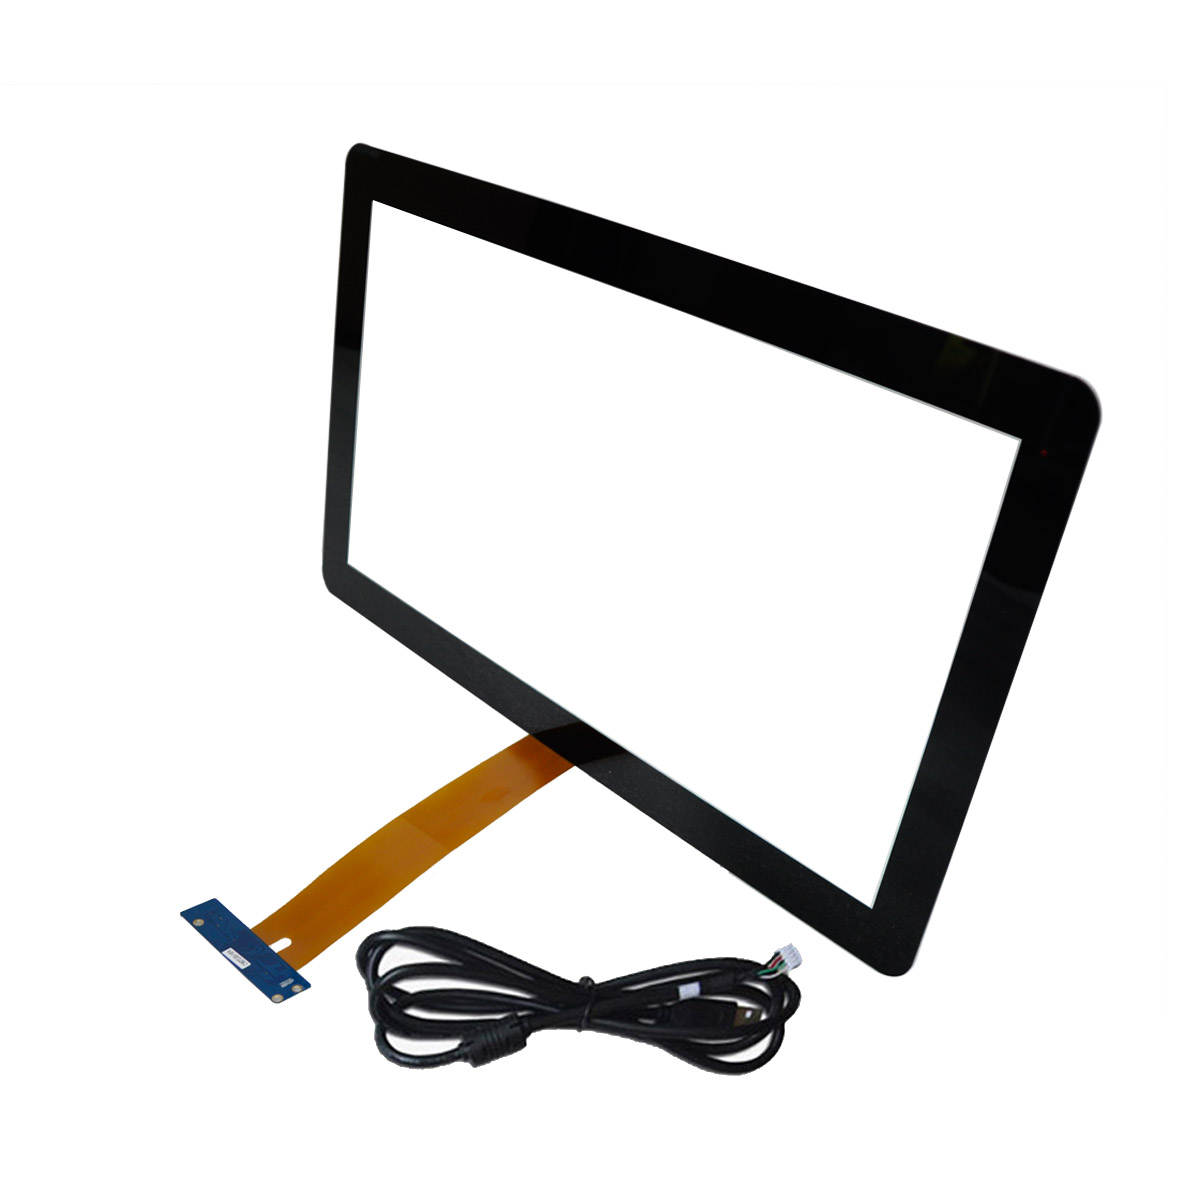 18.5 inch Projected Capacitive touch screen panel PCAP/PCT EETI/ilitek Controller, Wide to...